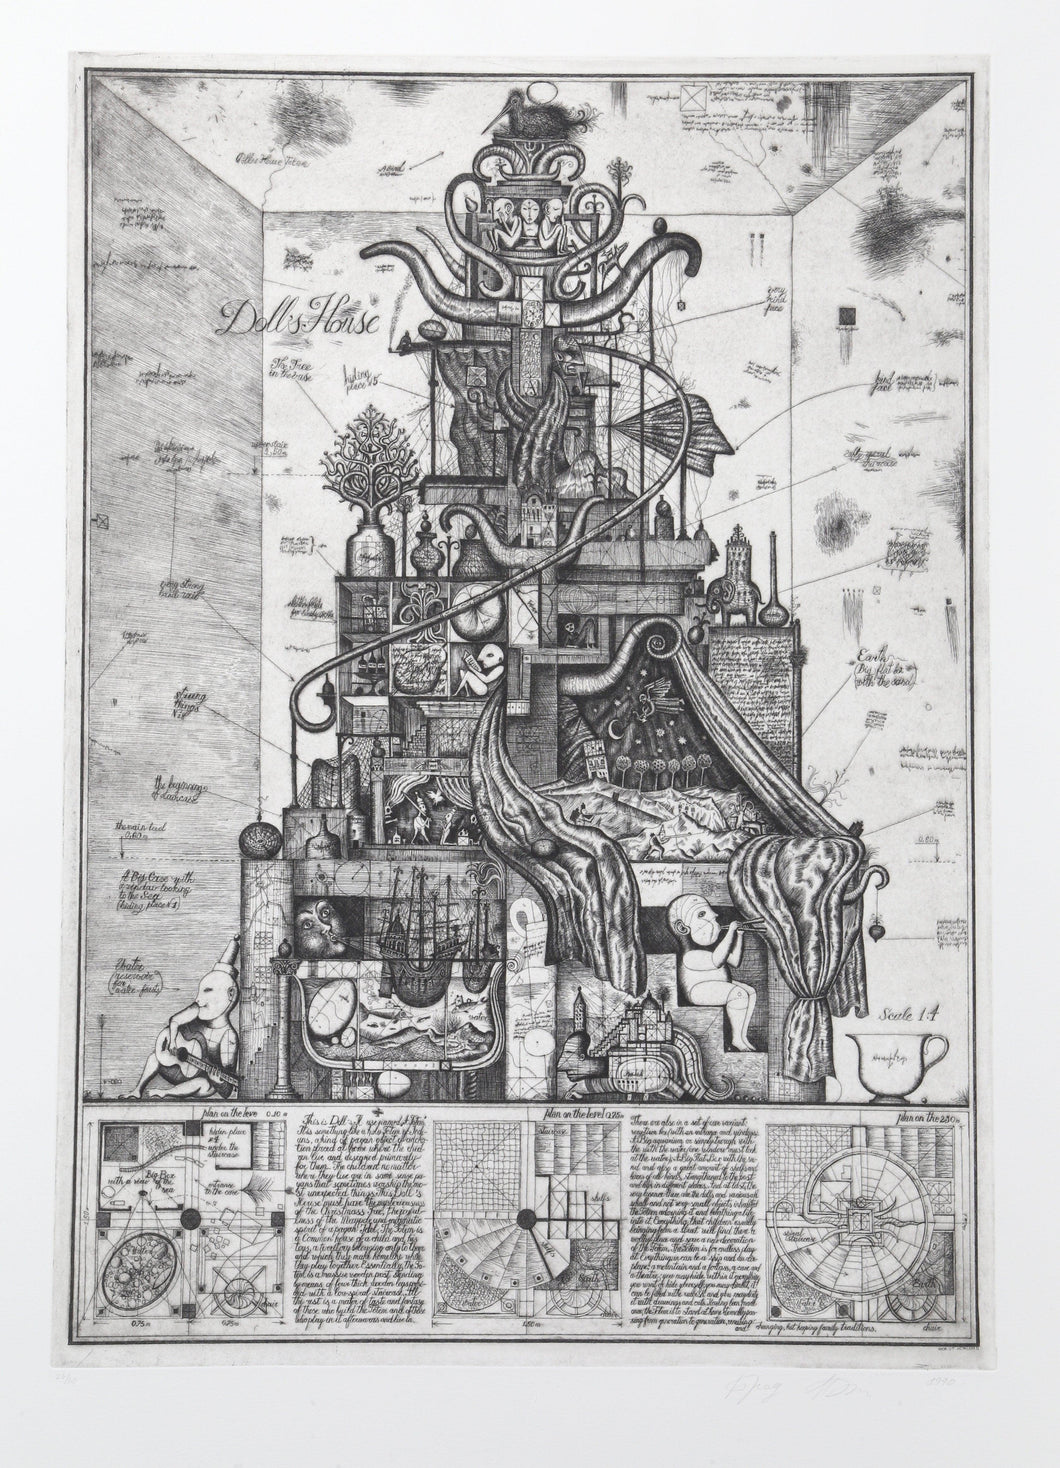 Doll's House from Brodsky and Utkin: Projects 1981 - 1990 Etching | Alexander Brodsky and Ilya Utkin,{{product.type}}